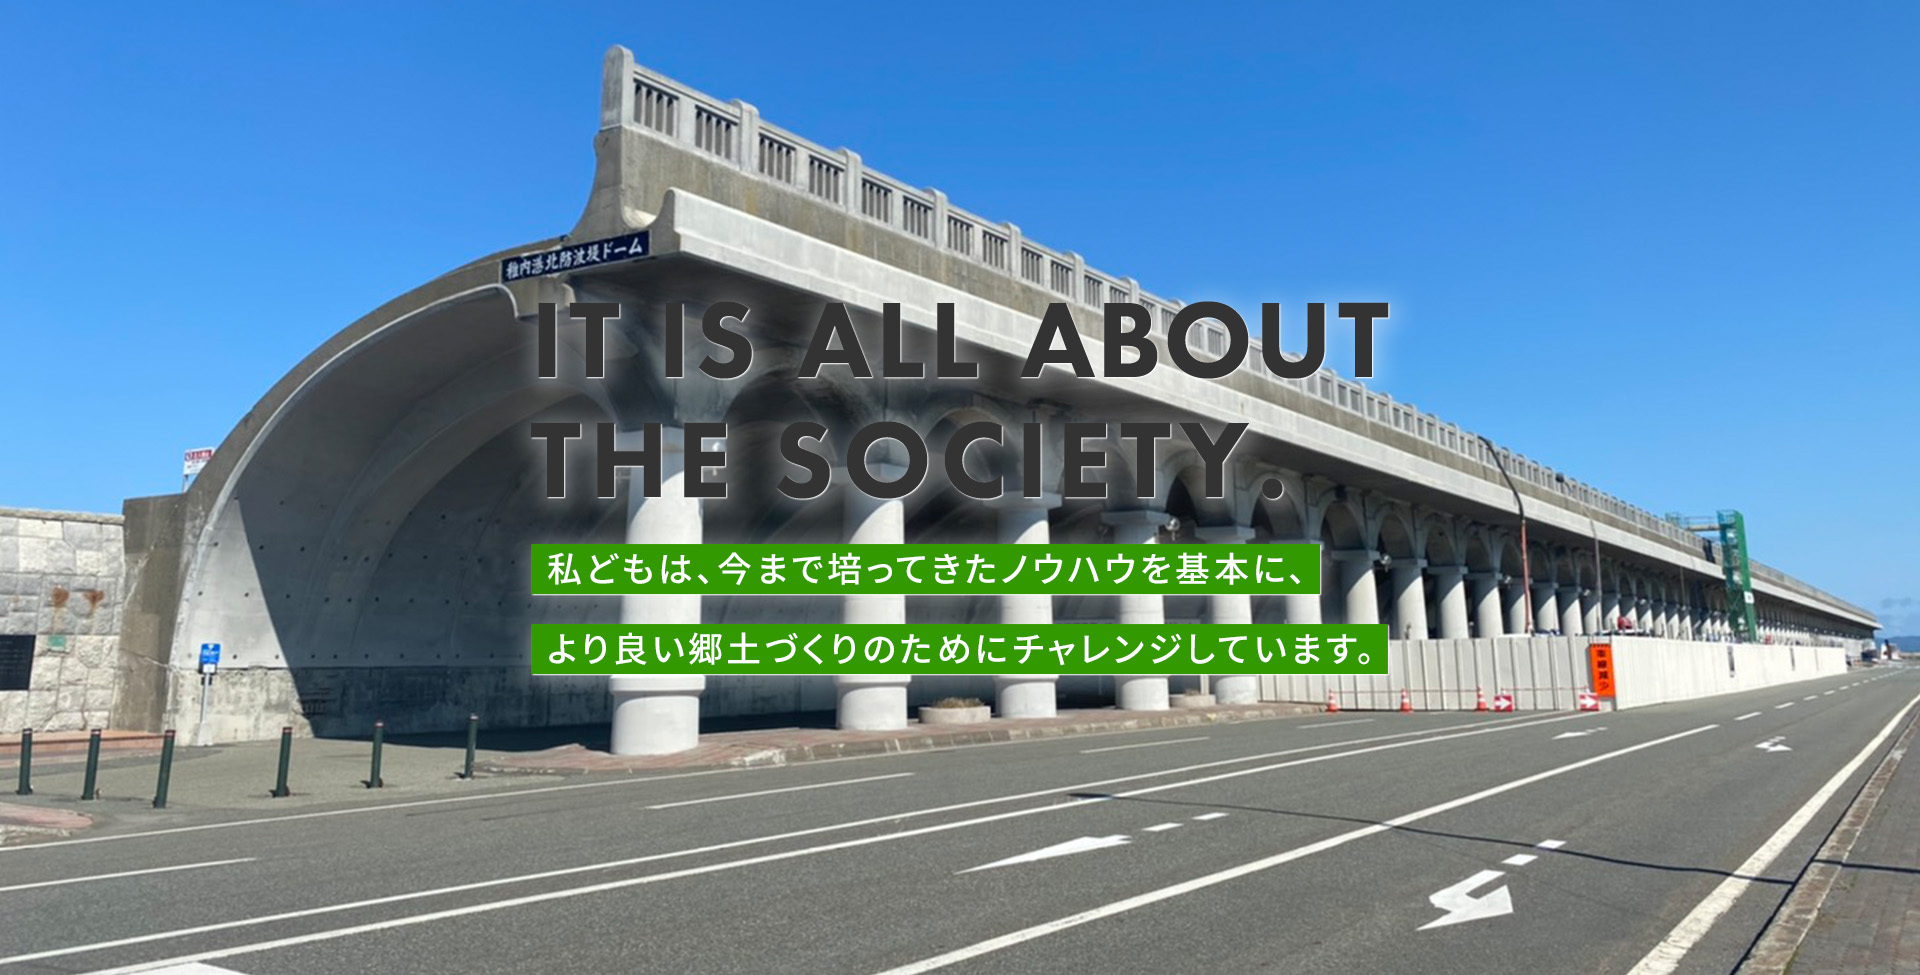 IT IS ALL ABOUT THE SOCIETY